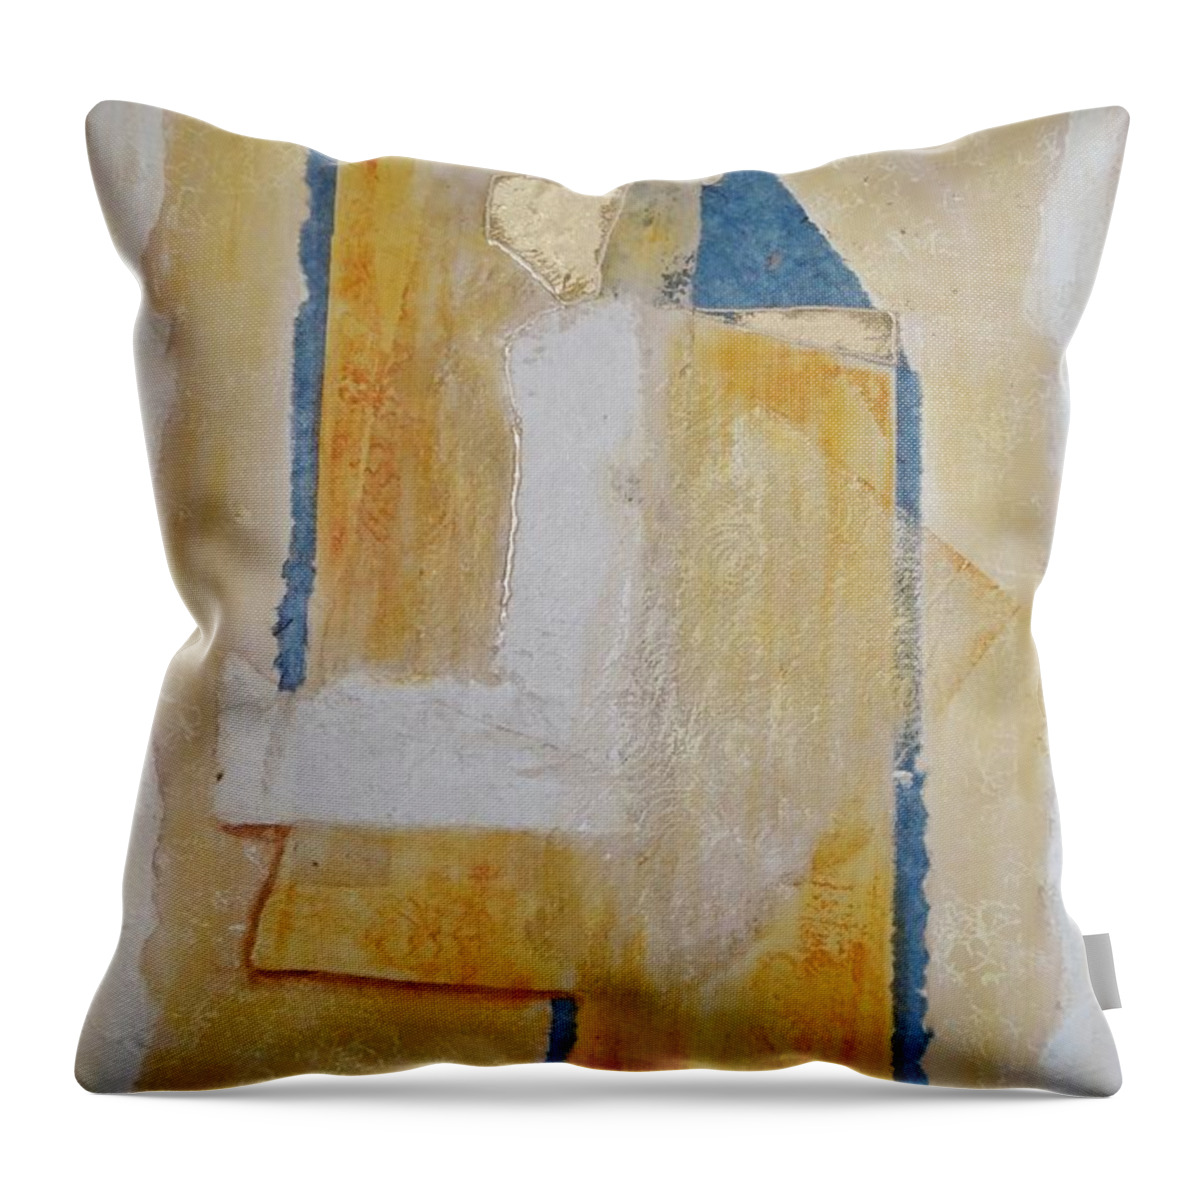 Geometric Throw Pillow featuring the painting Sheer Pleasure by Kat McClure